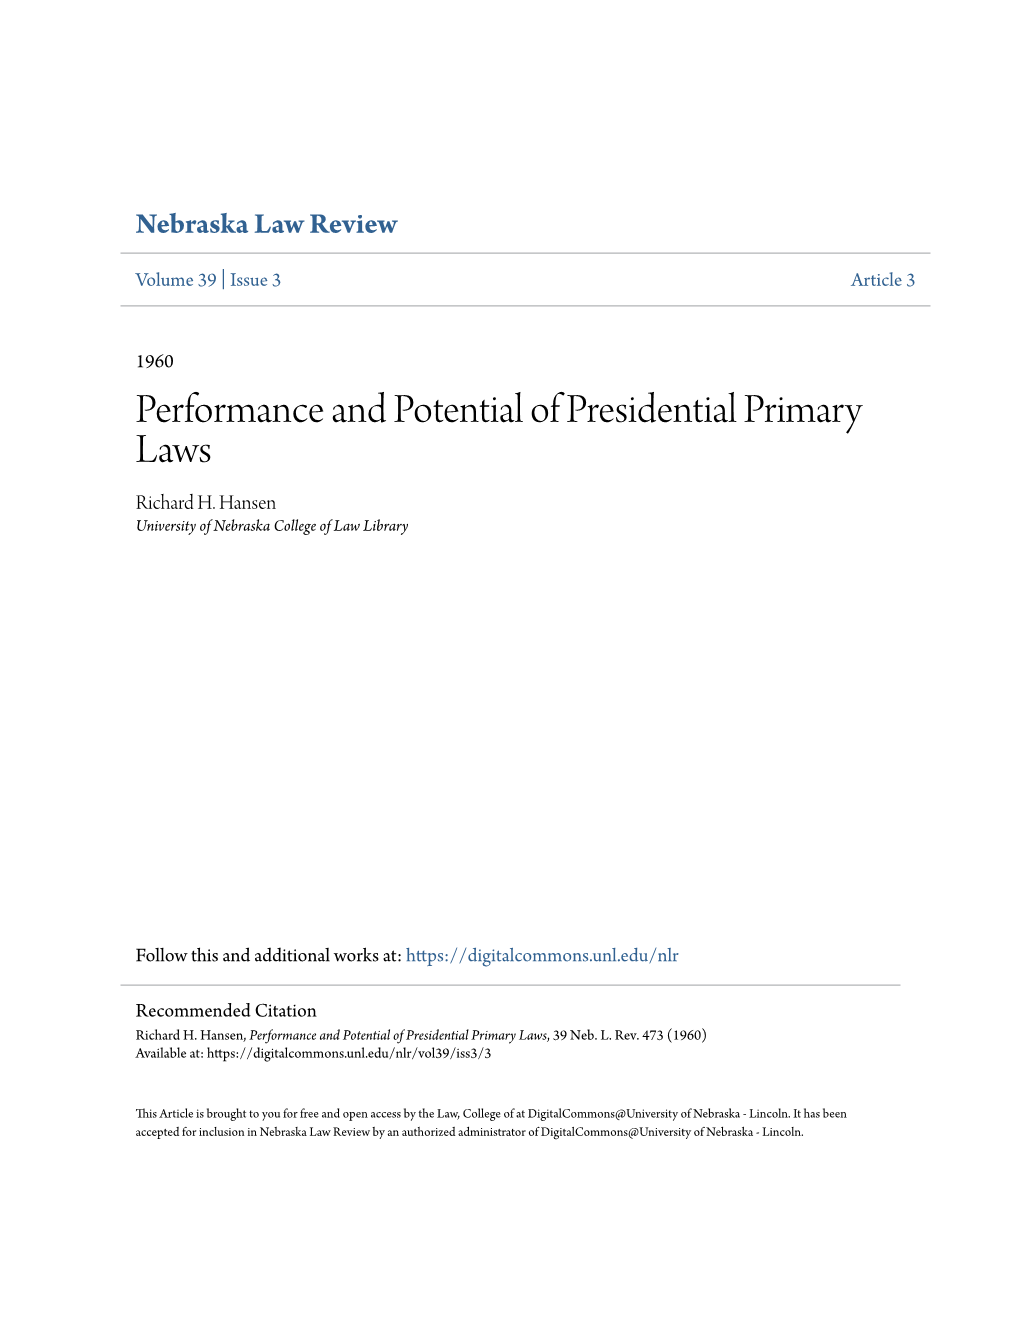 Performance and Potential of Presidential Primary Laws Richard H